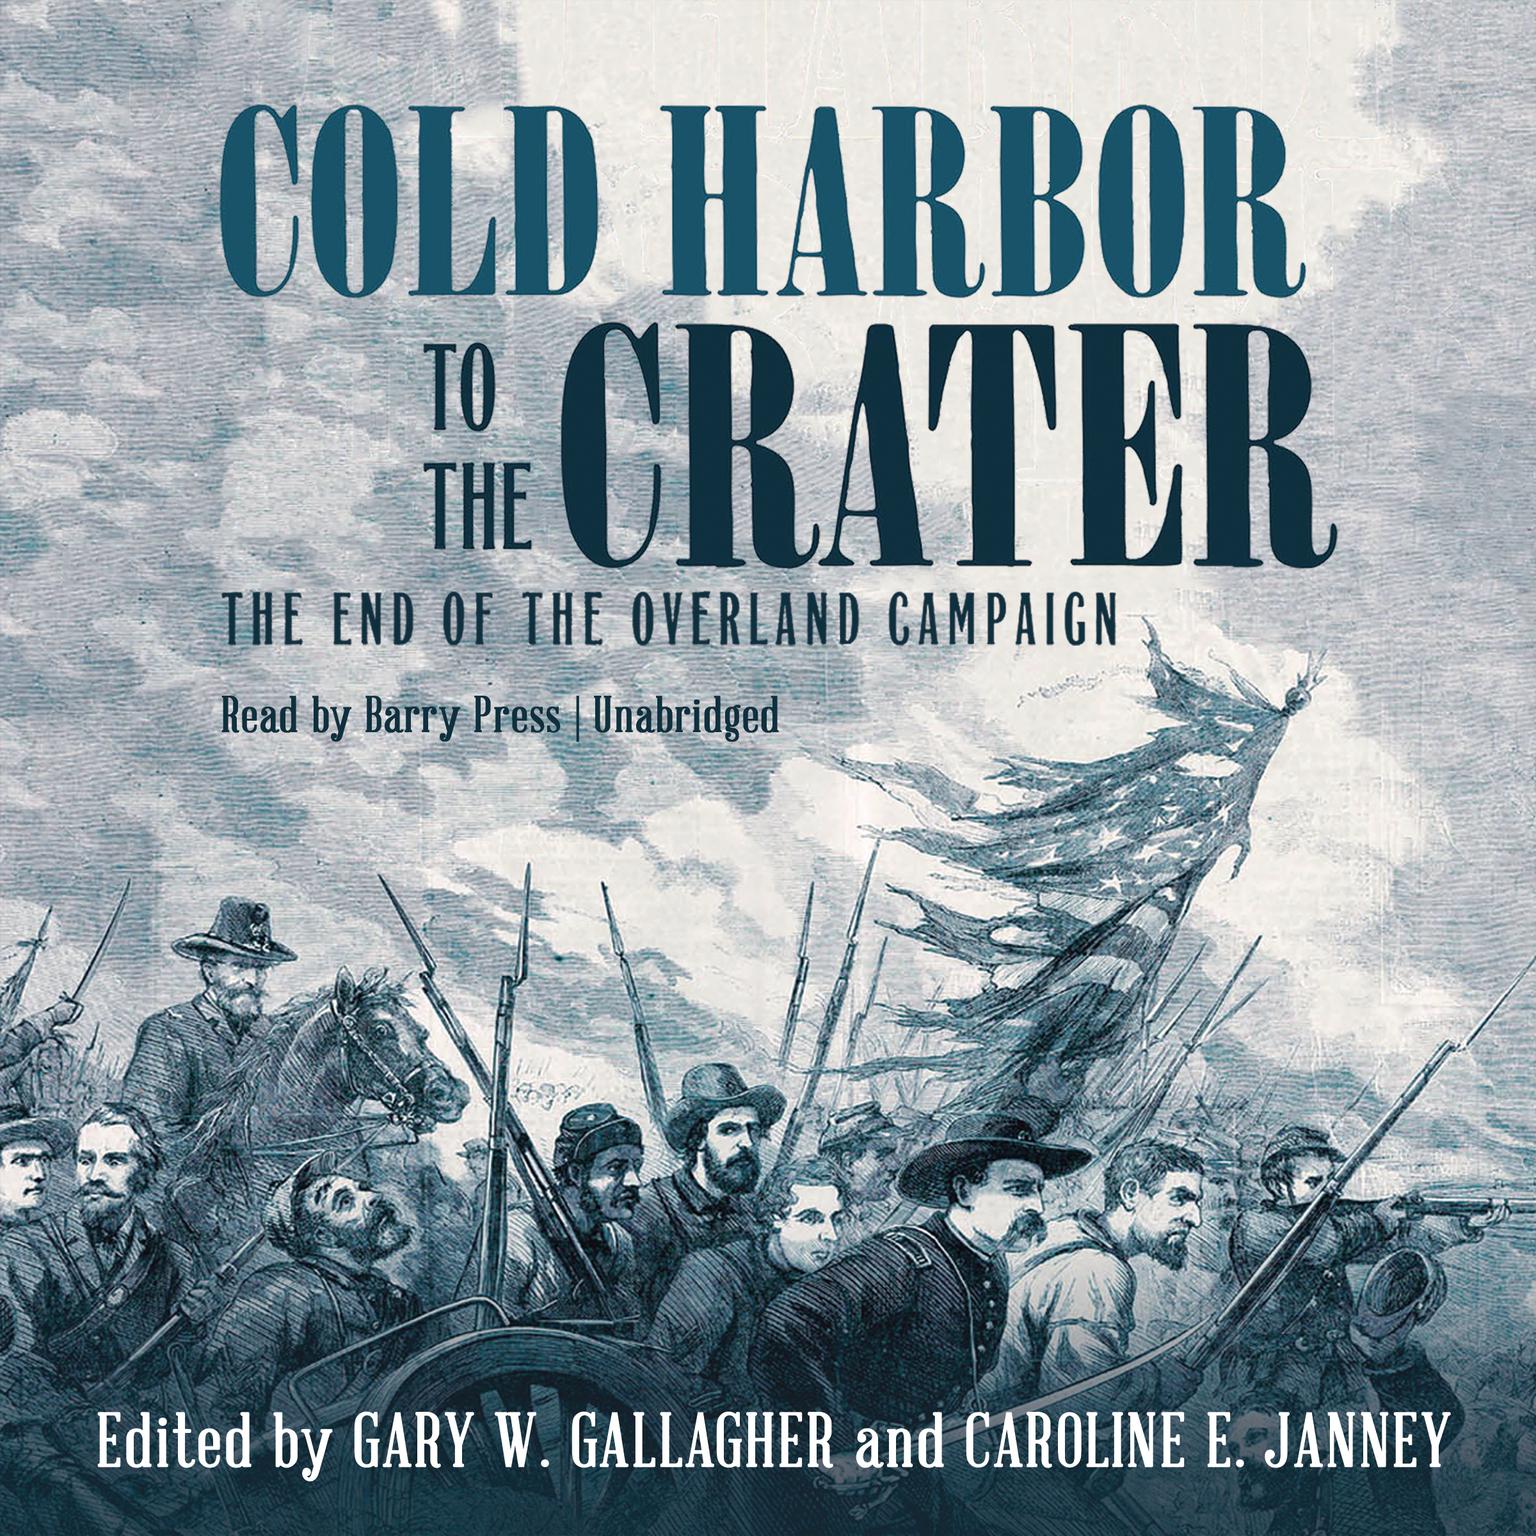 Cold Harbor to the Crater: The End of the Overland Campaign Audiobook, by Gary W. Gallagher